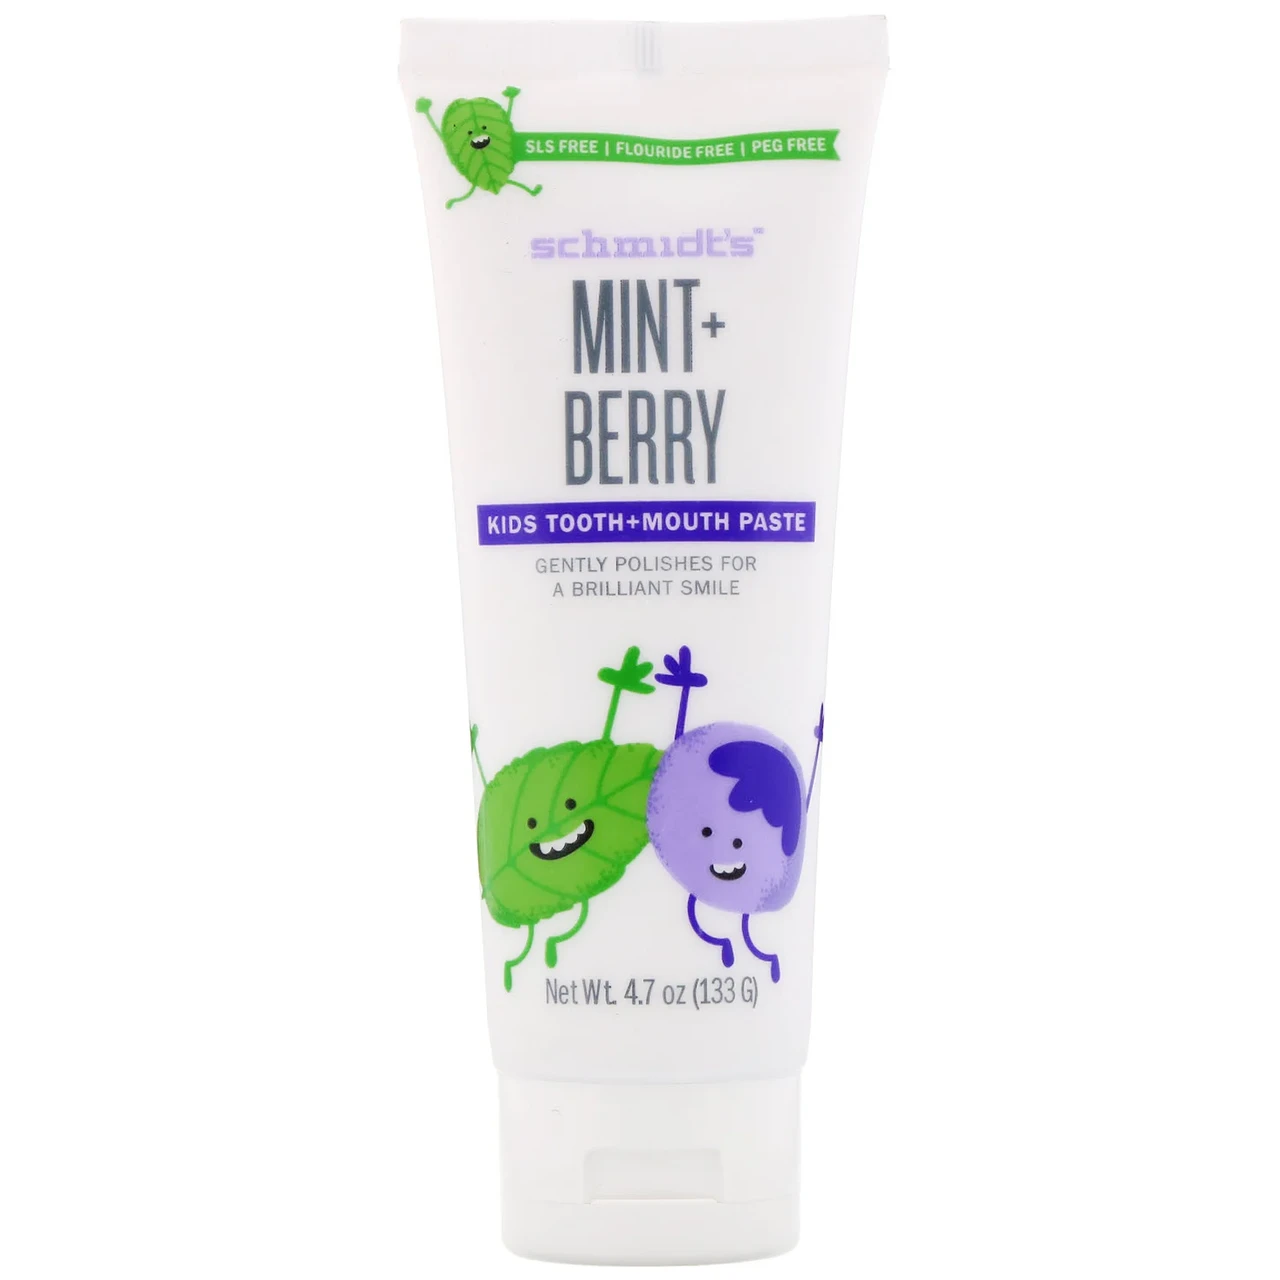 Schmidt's, Kids Tooth + Mouth Paste, Mint + Berry , 4.7 oz (133 g) Киев - фото 1 - id-p1678048226